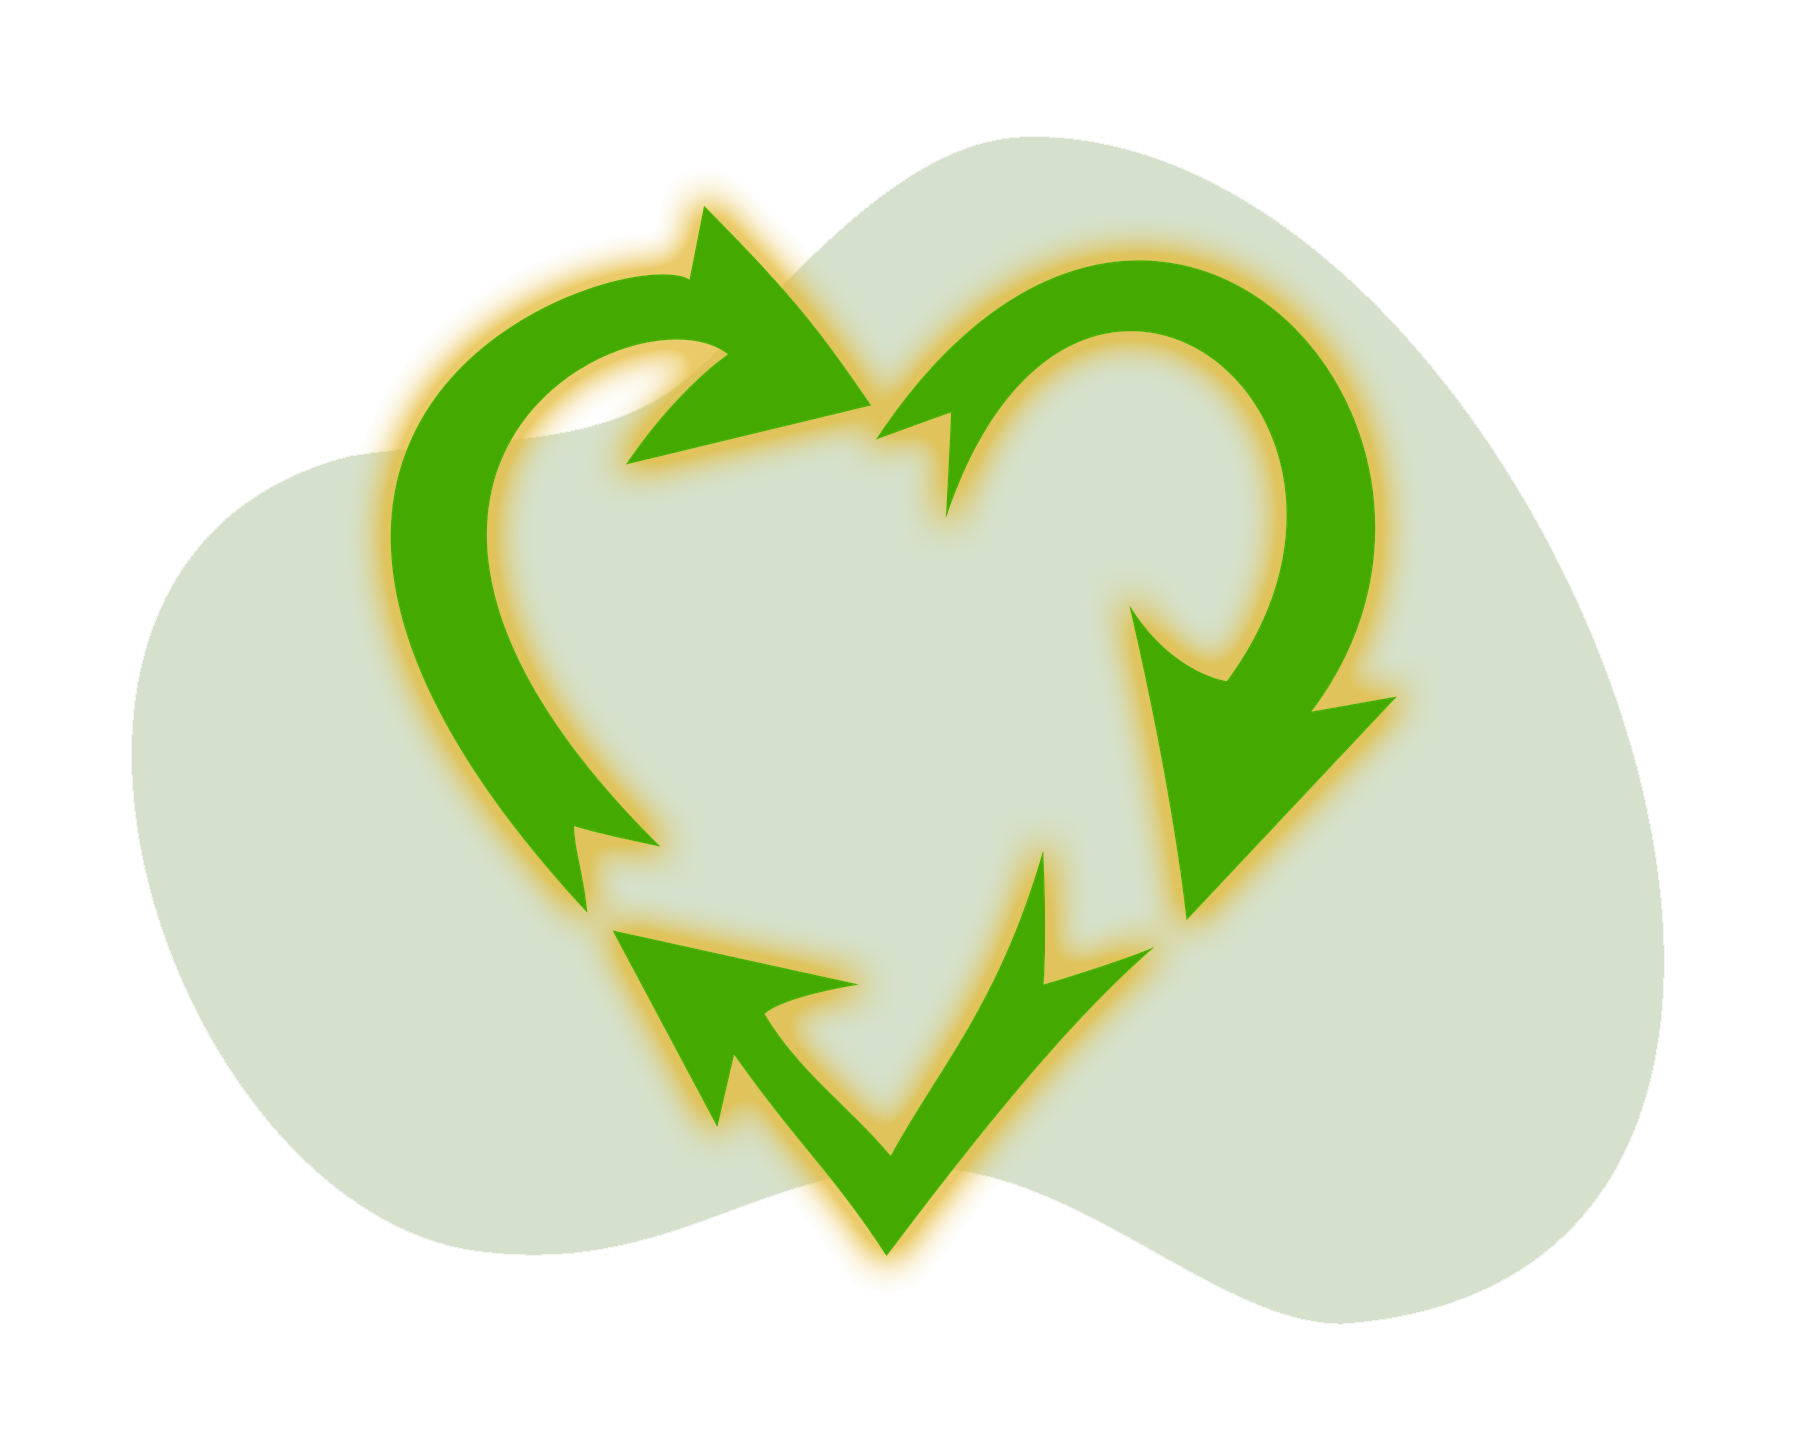 Recycle symbol in the shape of a heart